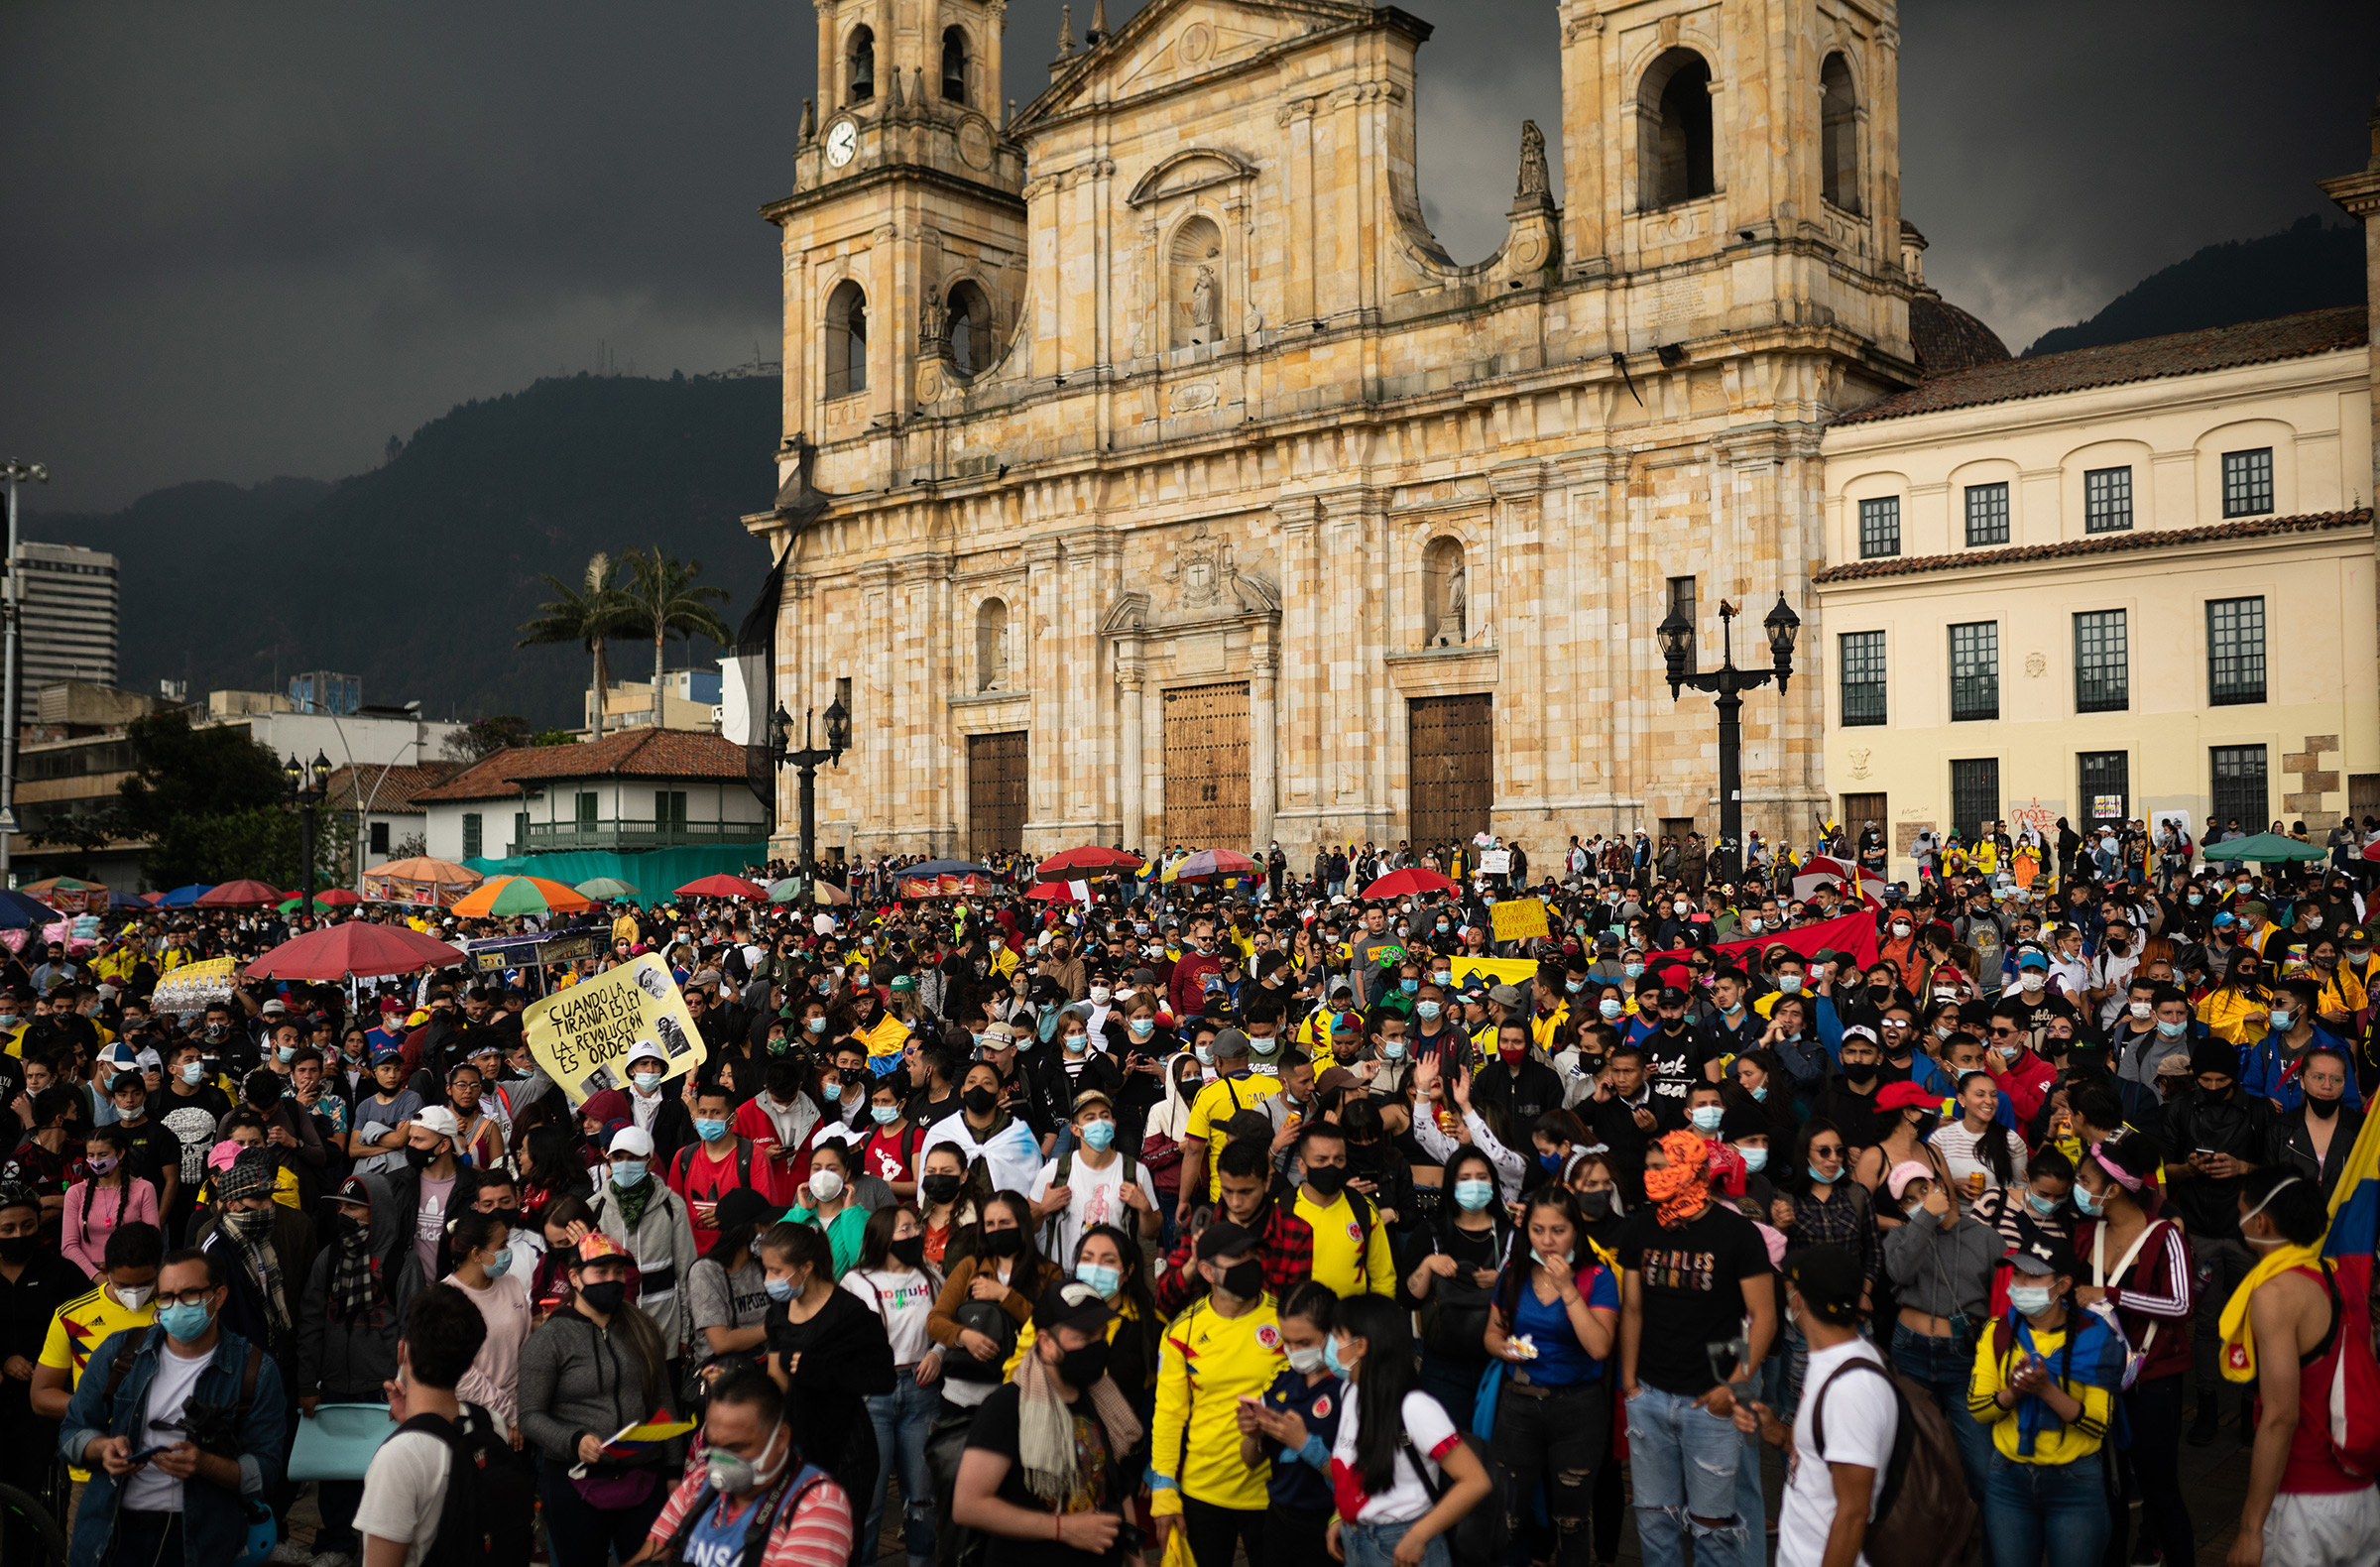 Hundreds of marchers arrive at the Plaza de Bolivar, so far 1708 cases of police violence have been registered according to the NGO Temblores, which monitors the protests. Picture by Andrés Cardona.